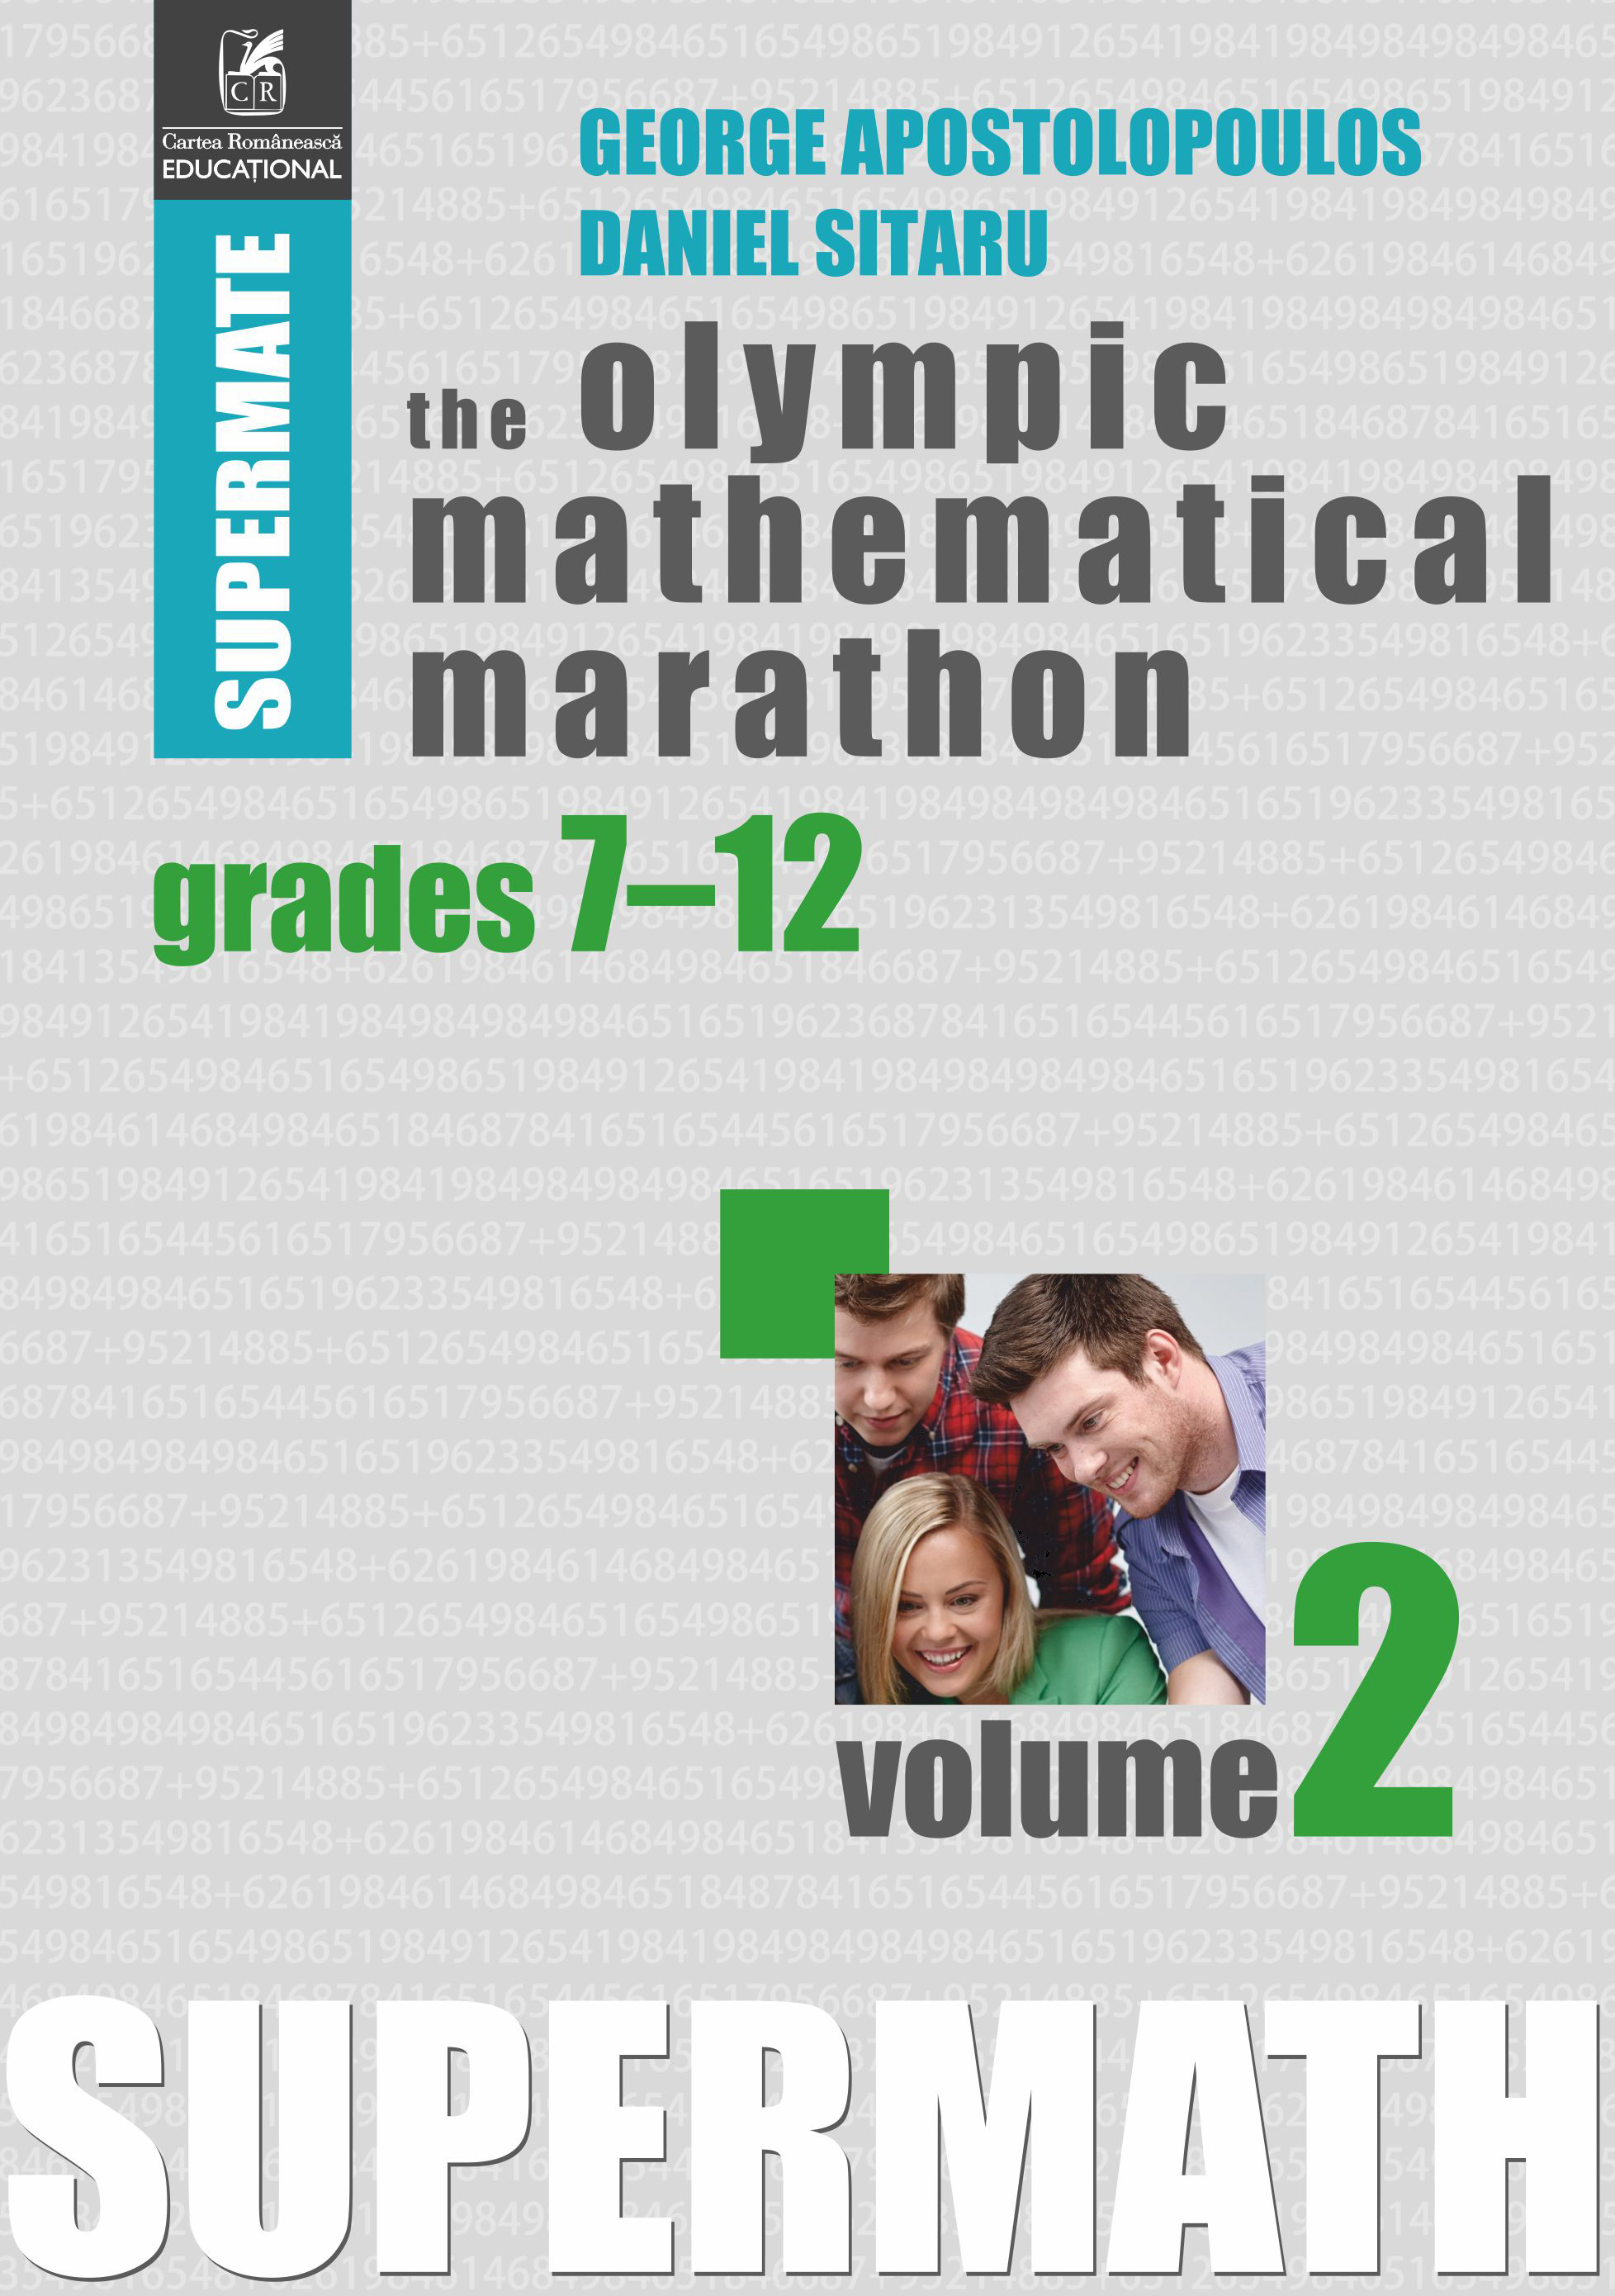 The Olympic Mathematical Maraton Grades 7-12 Vol.2 - George Apostolopoulos